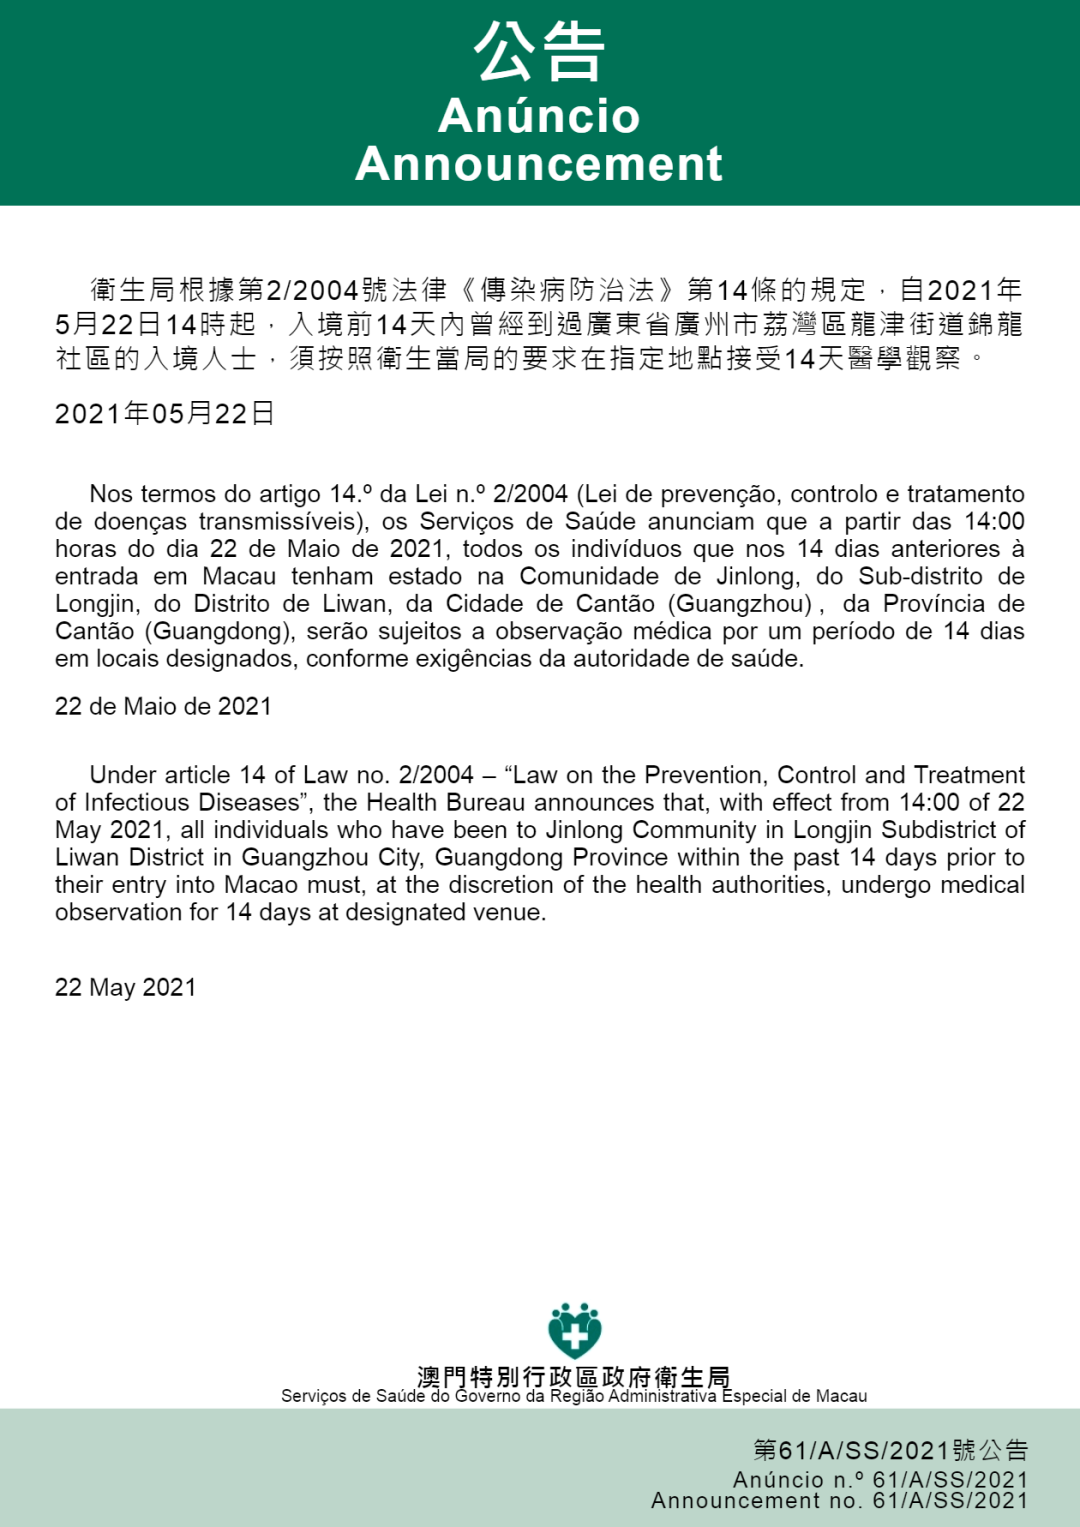 updates on travel measures & covid-19 situation in guangdong